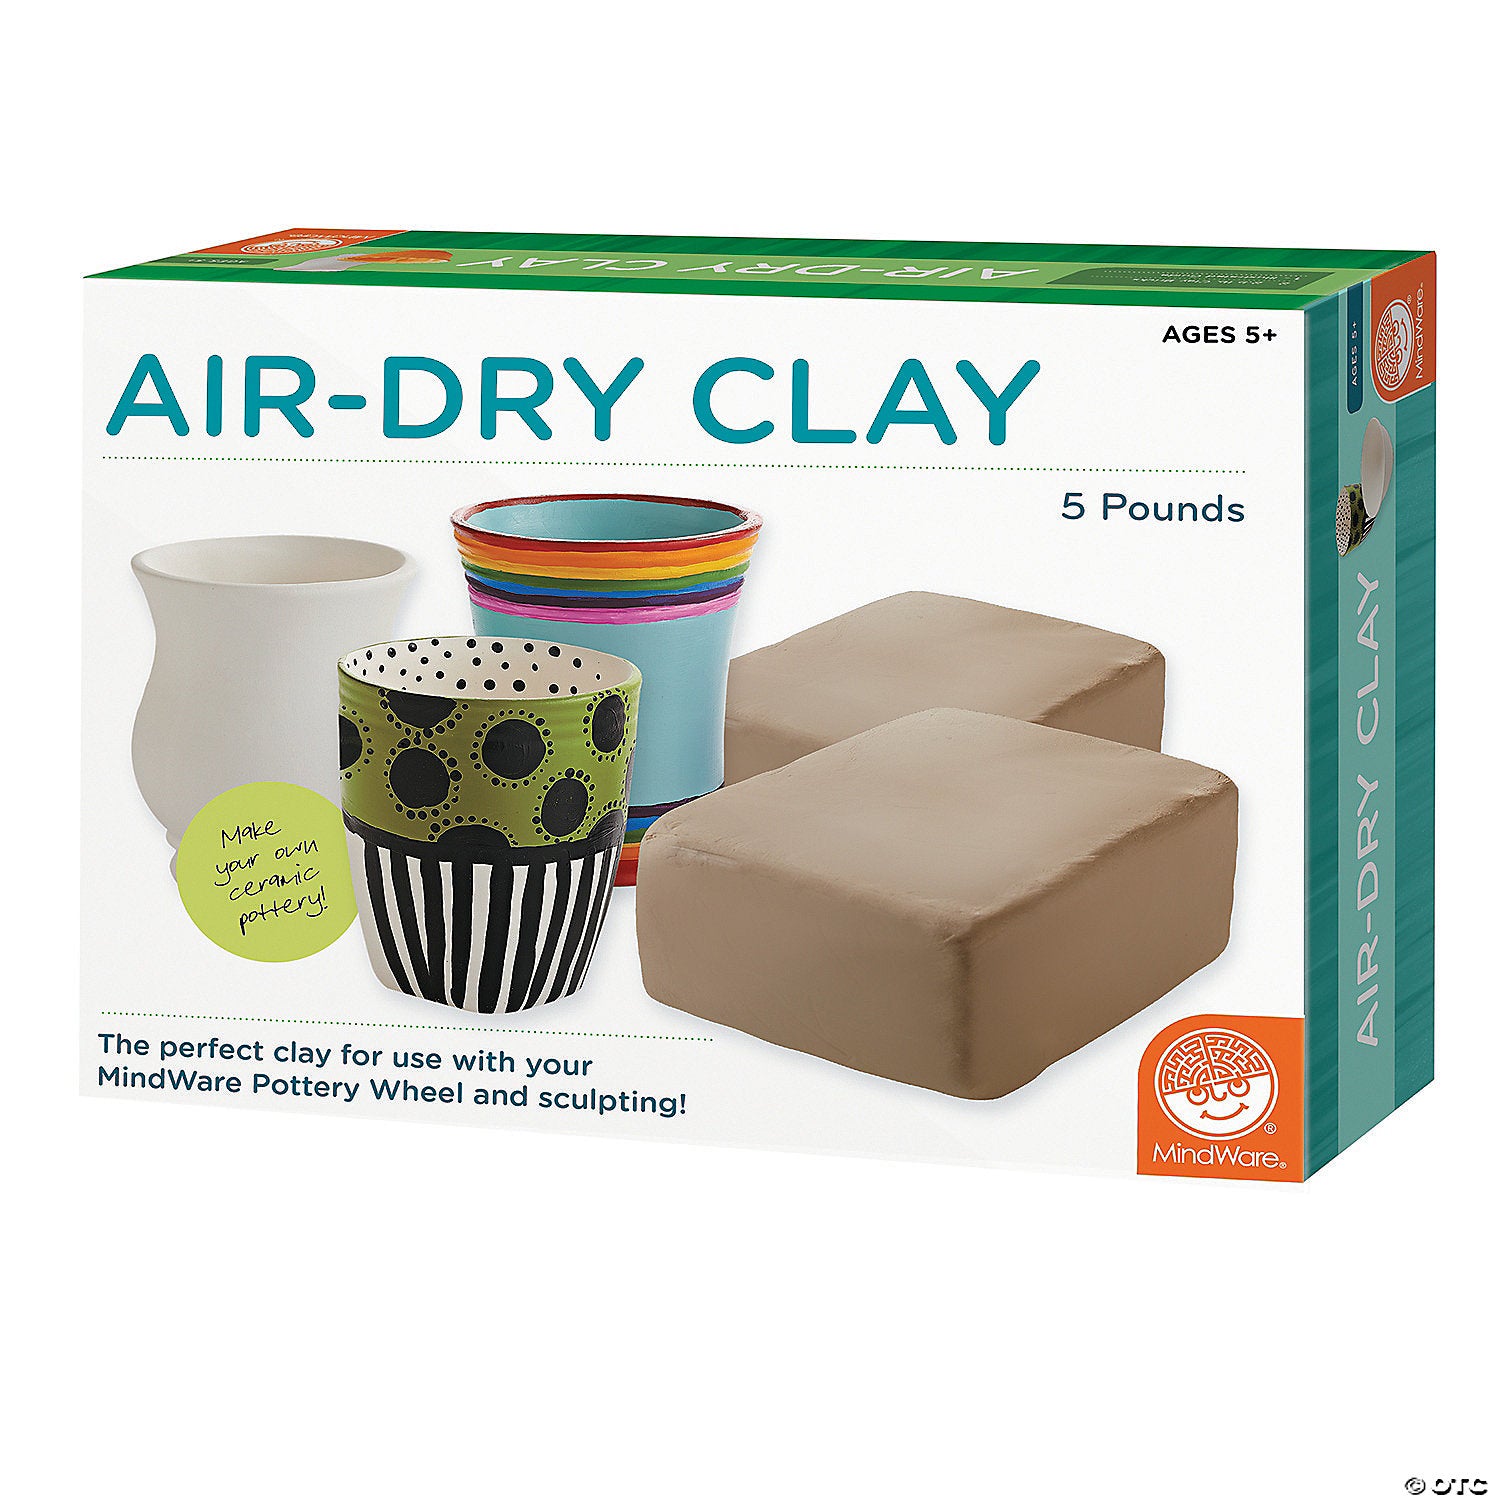 Air-Dry Clay - Ages 5+